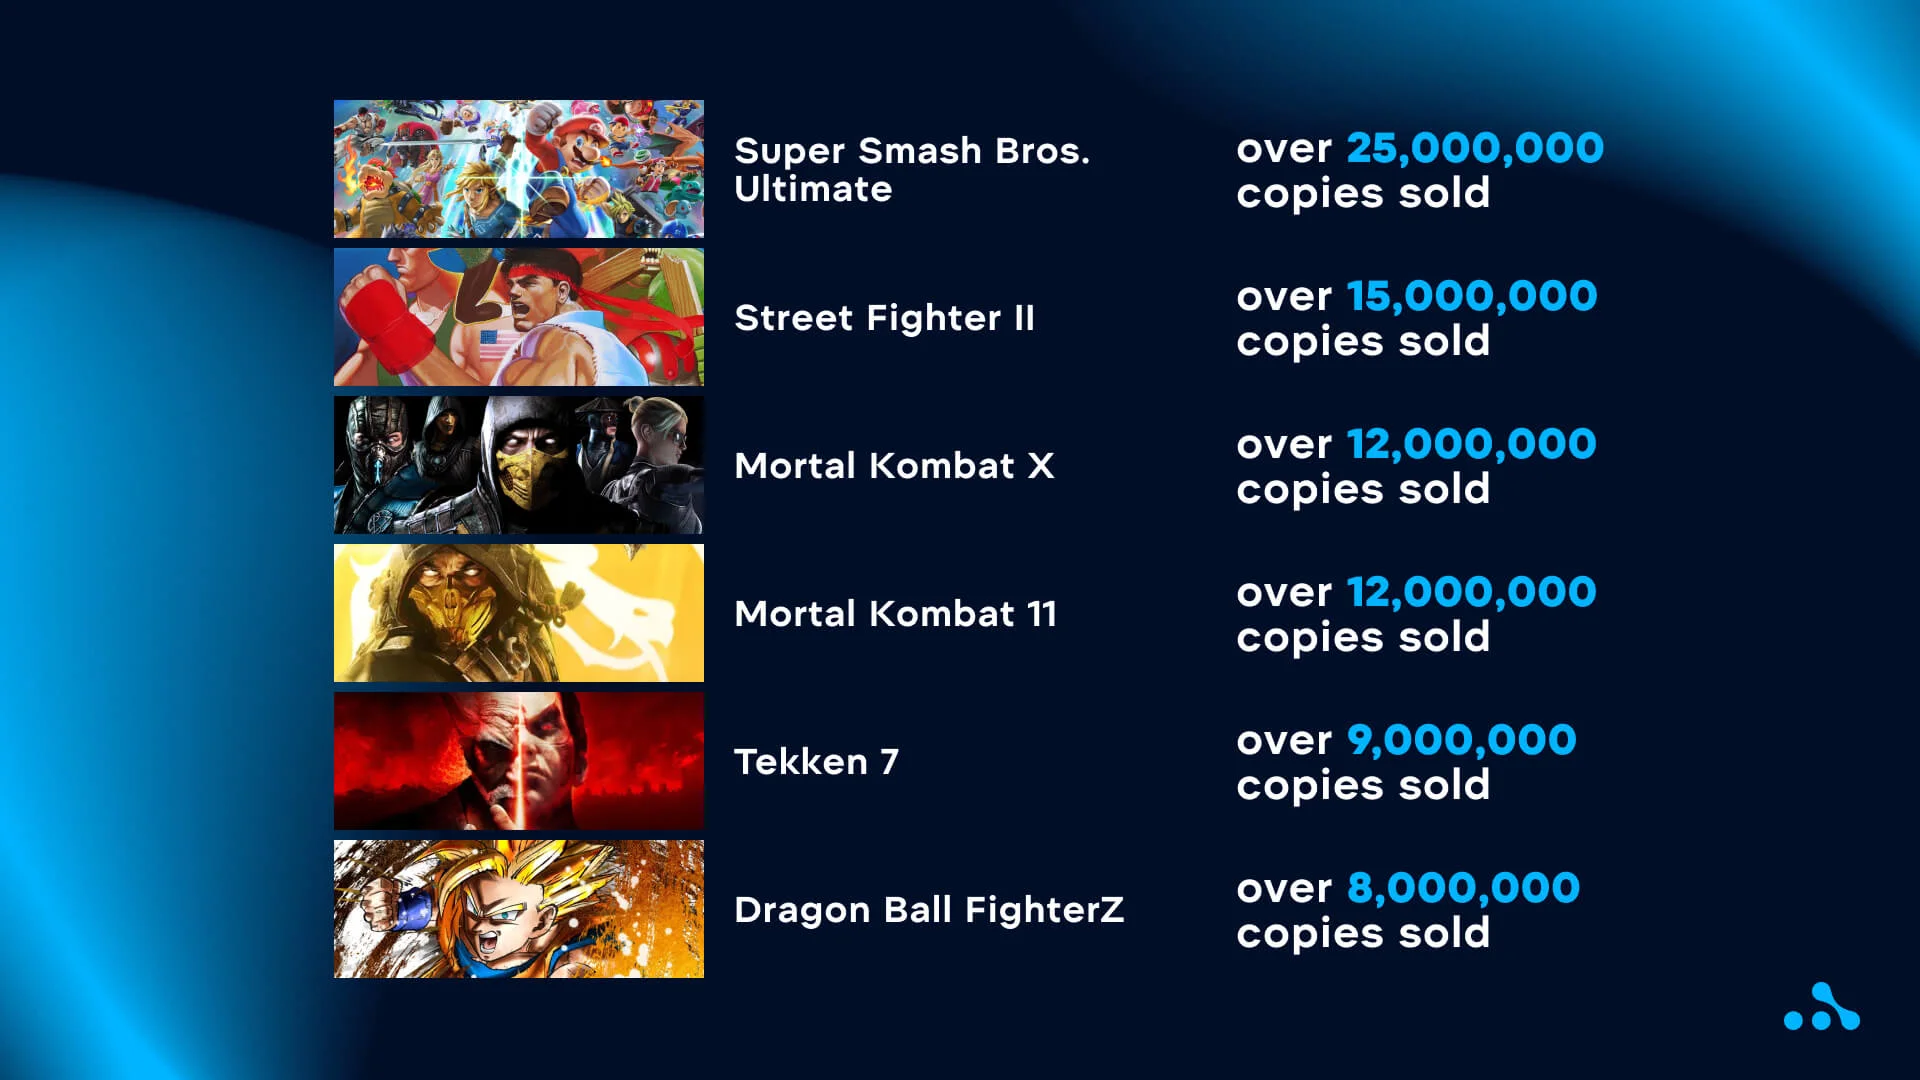 The most popular fighting games. Credit: WePlay Holding